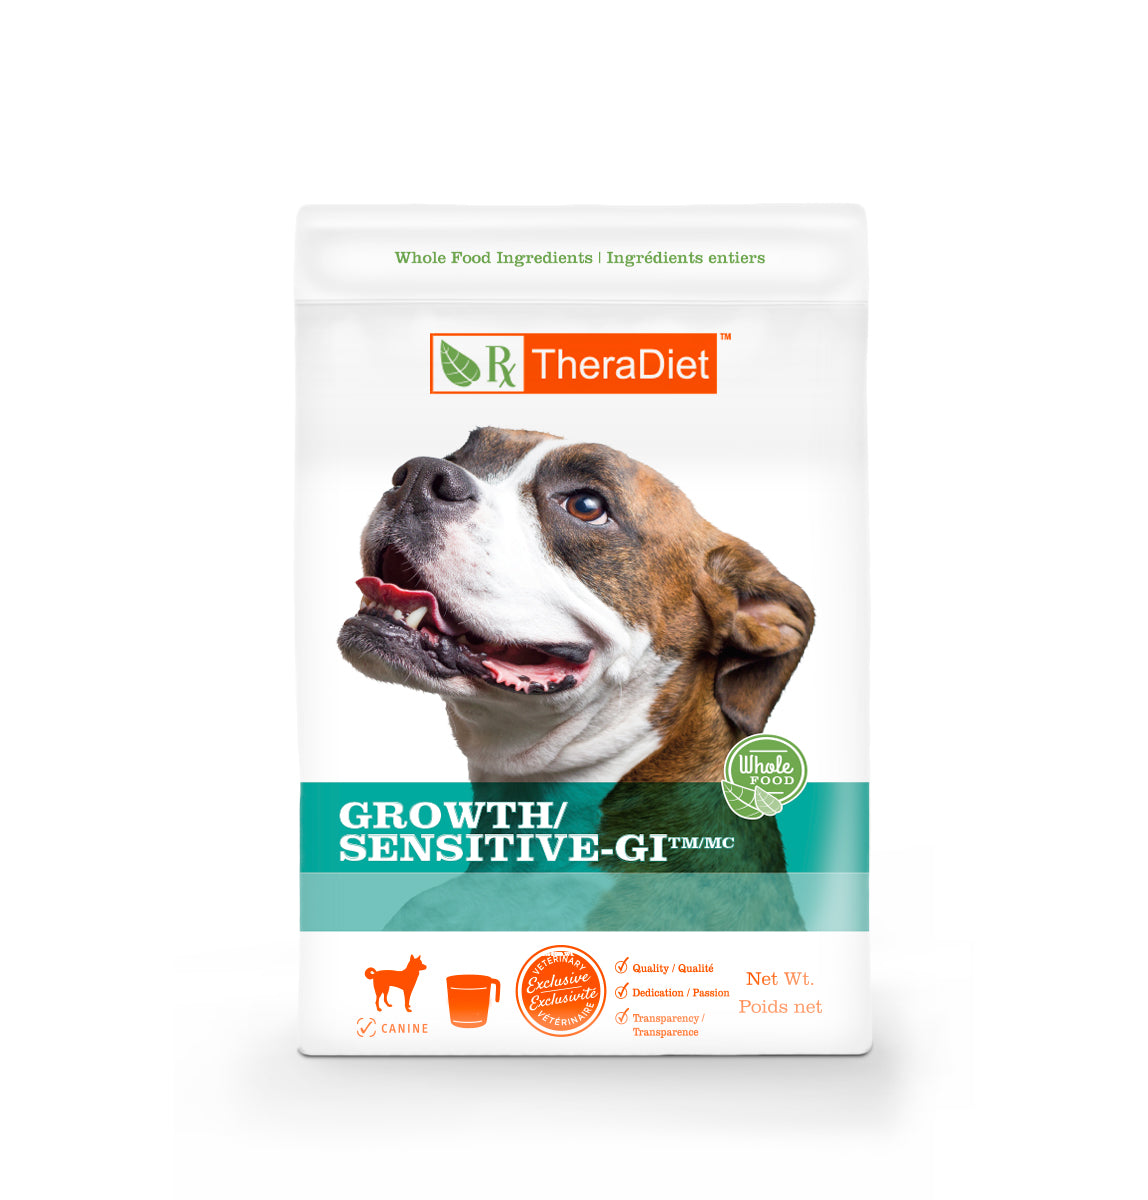 Growth/Sensitive-GI for Dogs and Puppies  Whole Food Diet for GI Health -  Rayne Canada